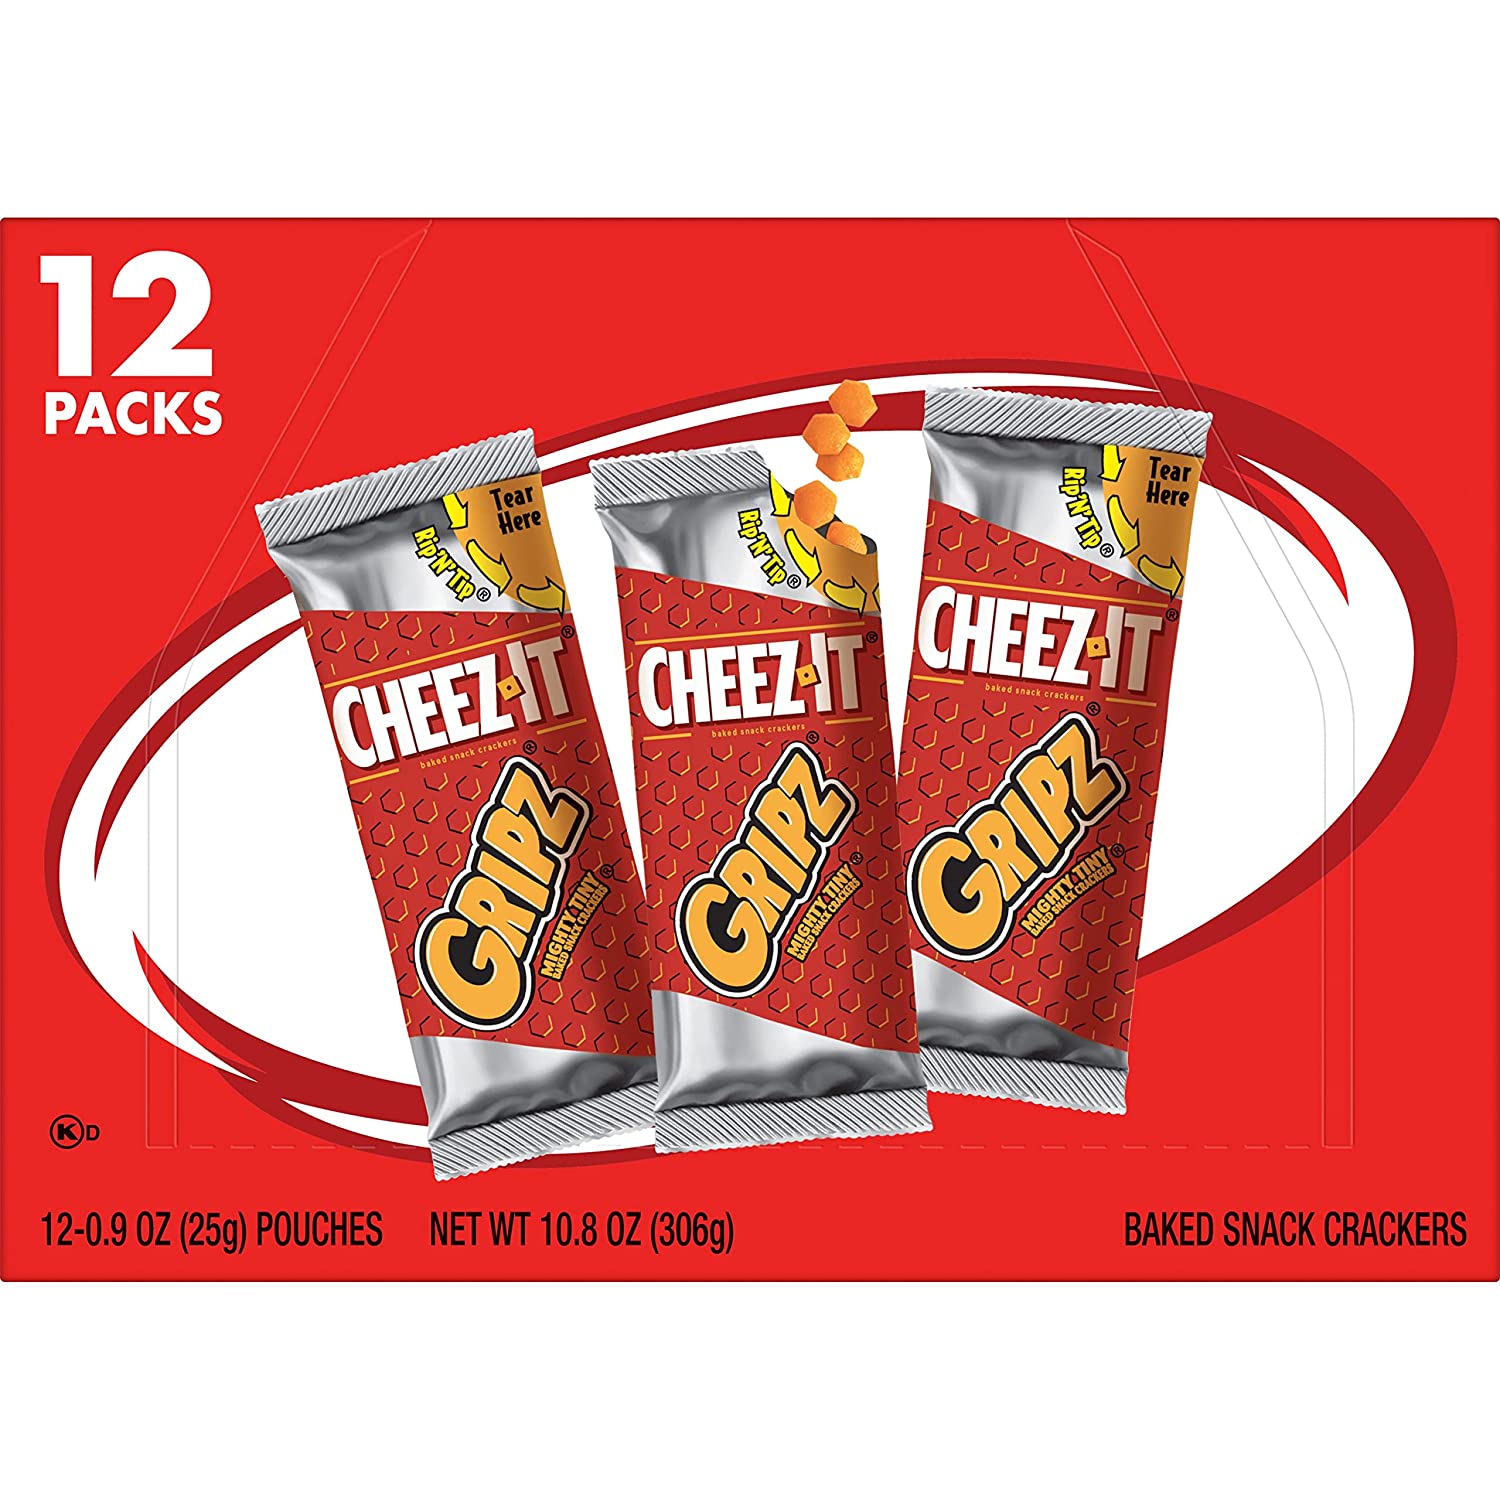 Cheez-It Gripz Tiny Baked Snack Crackers, Lunch Snacks, Office and Kids Snacks, Original, 10.8oz Box (12 Packs)